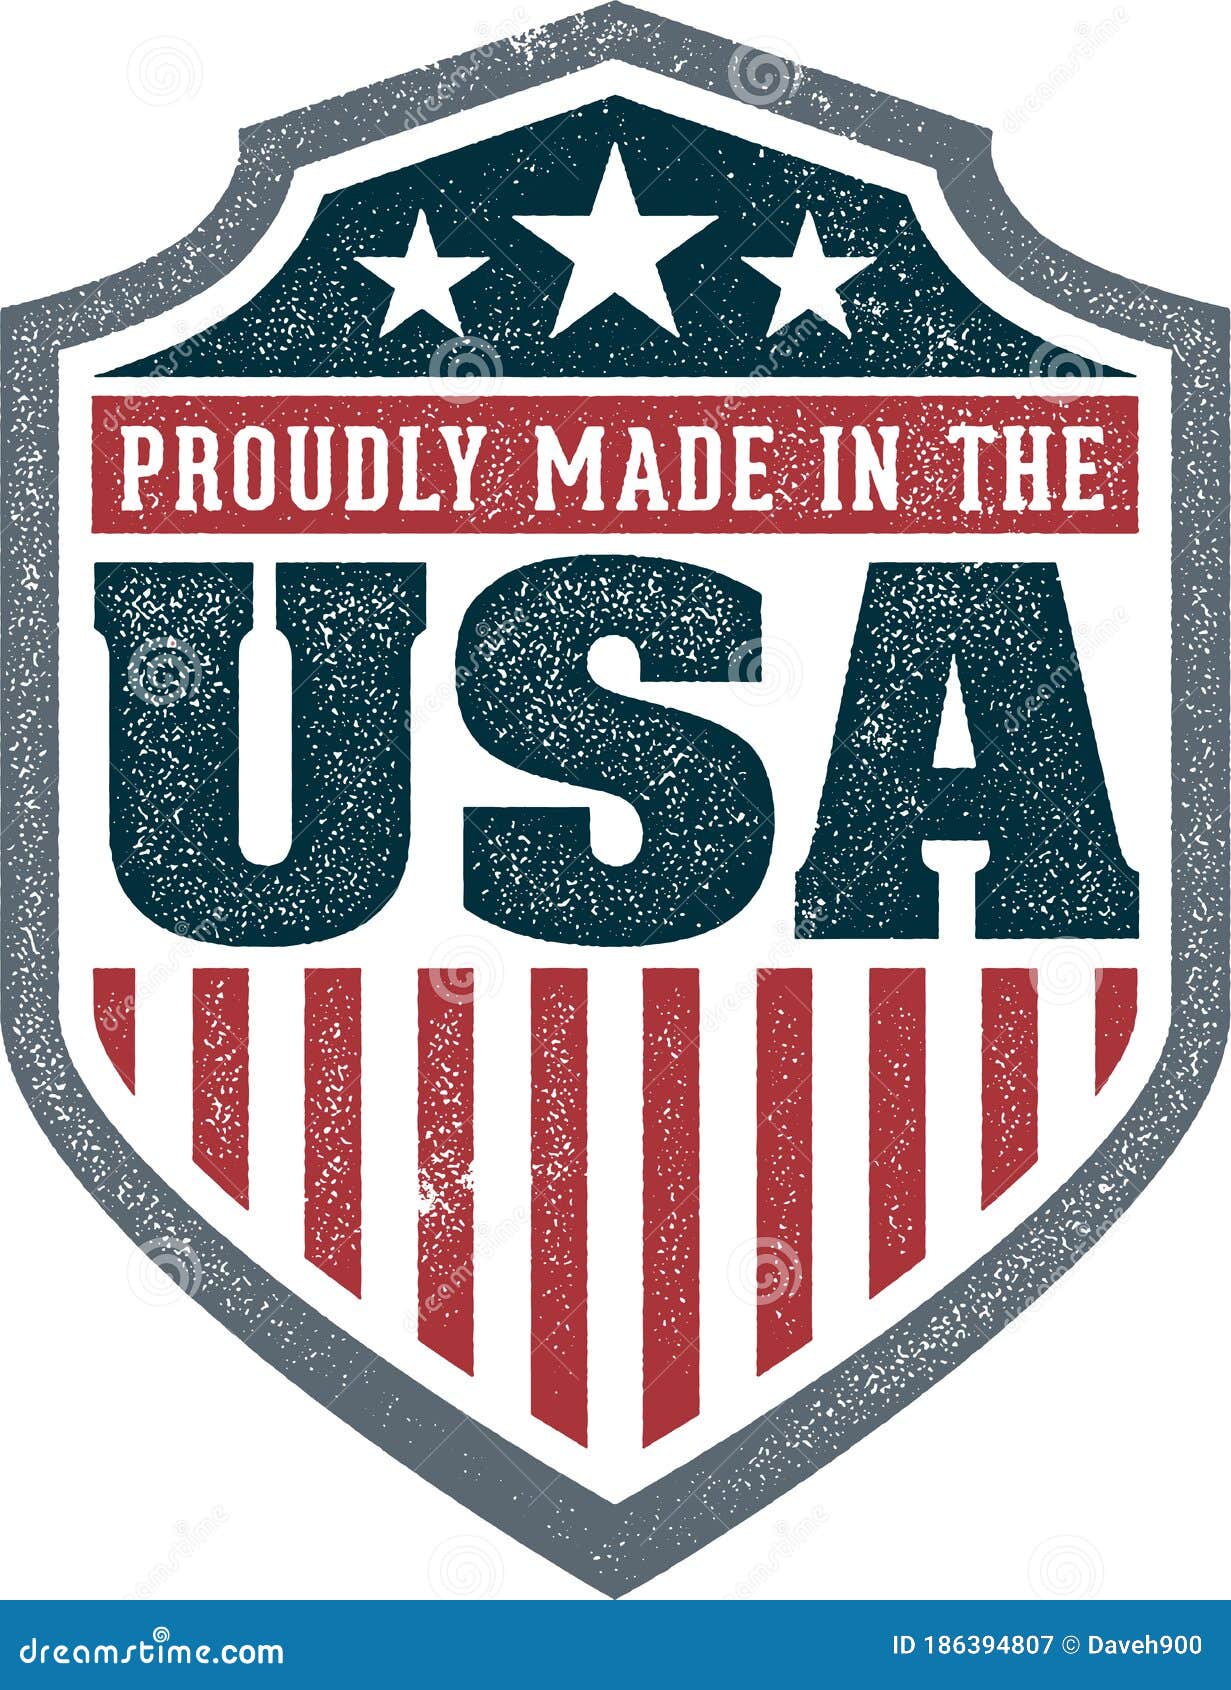 proudly made in the usa badge